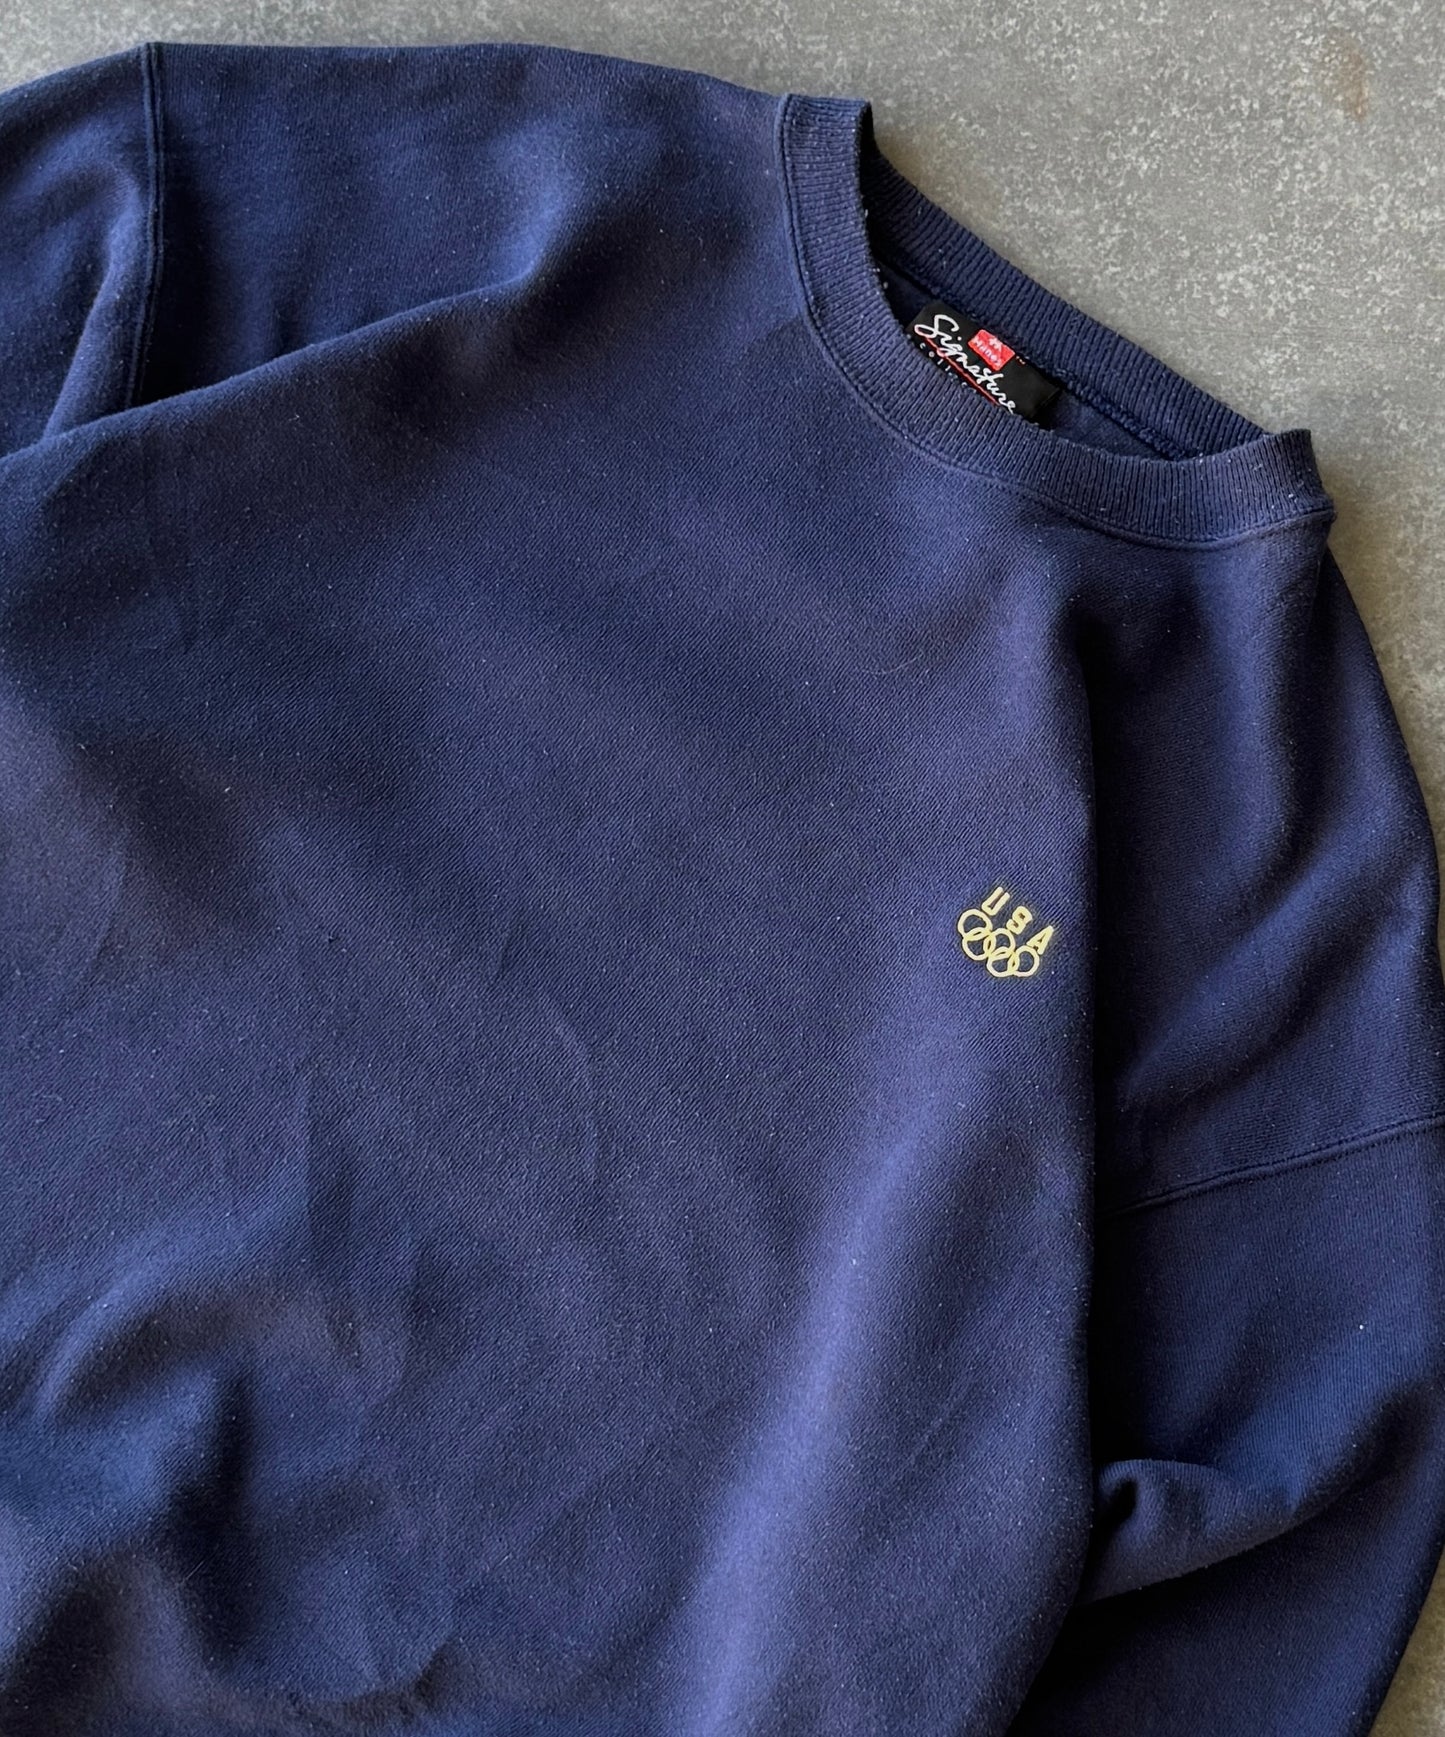 Vintage USA Olympics Essential Embroidered Sweater (L)